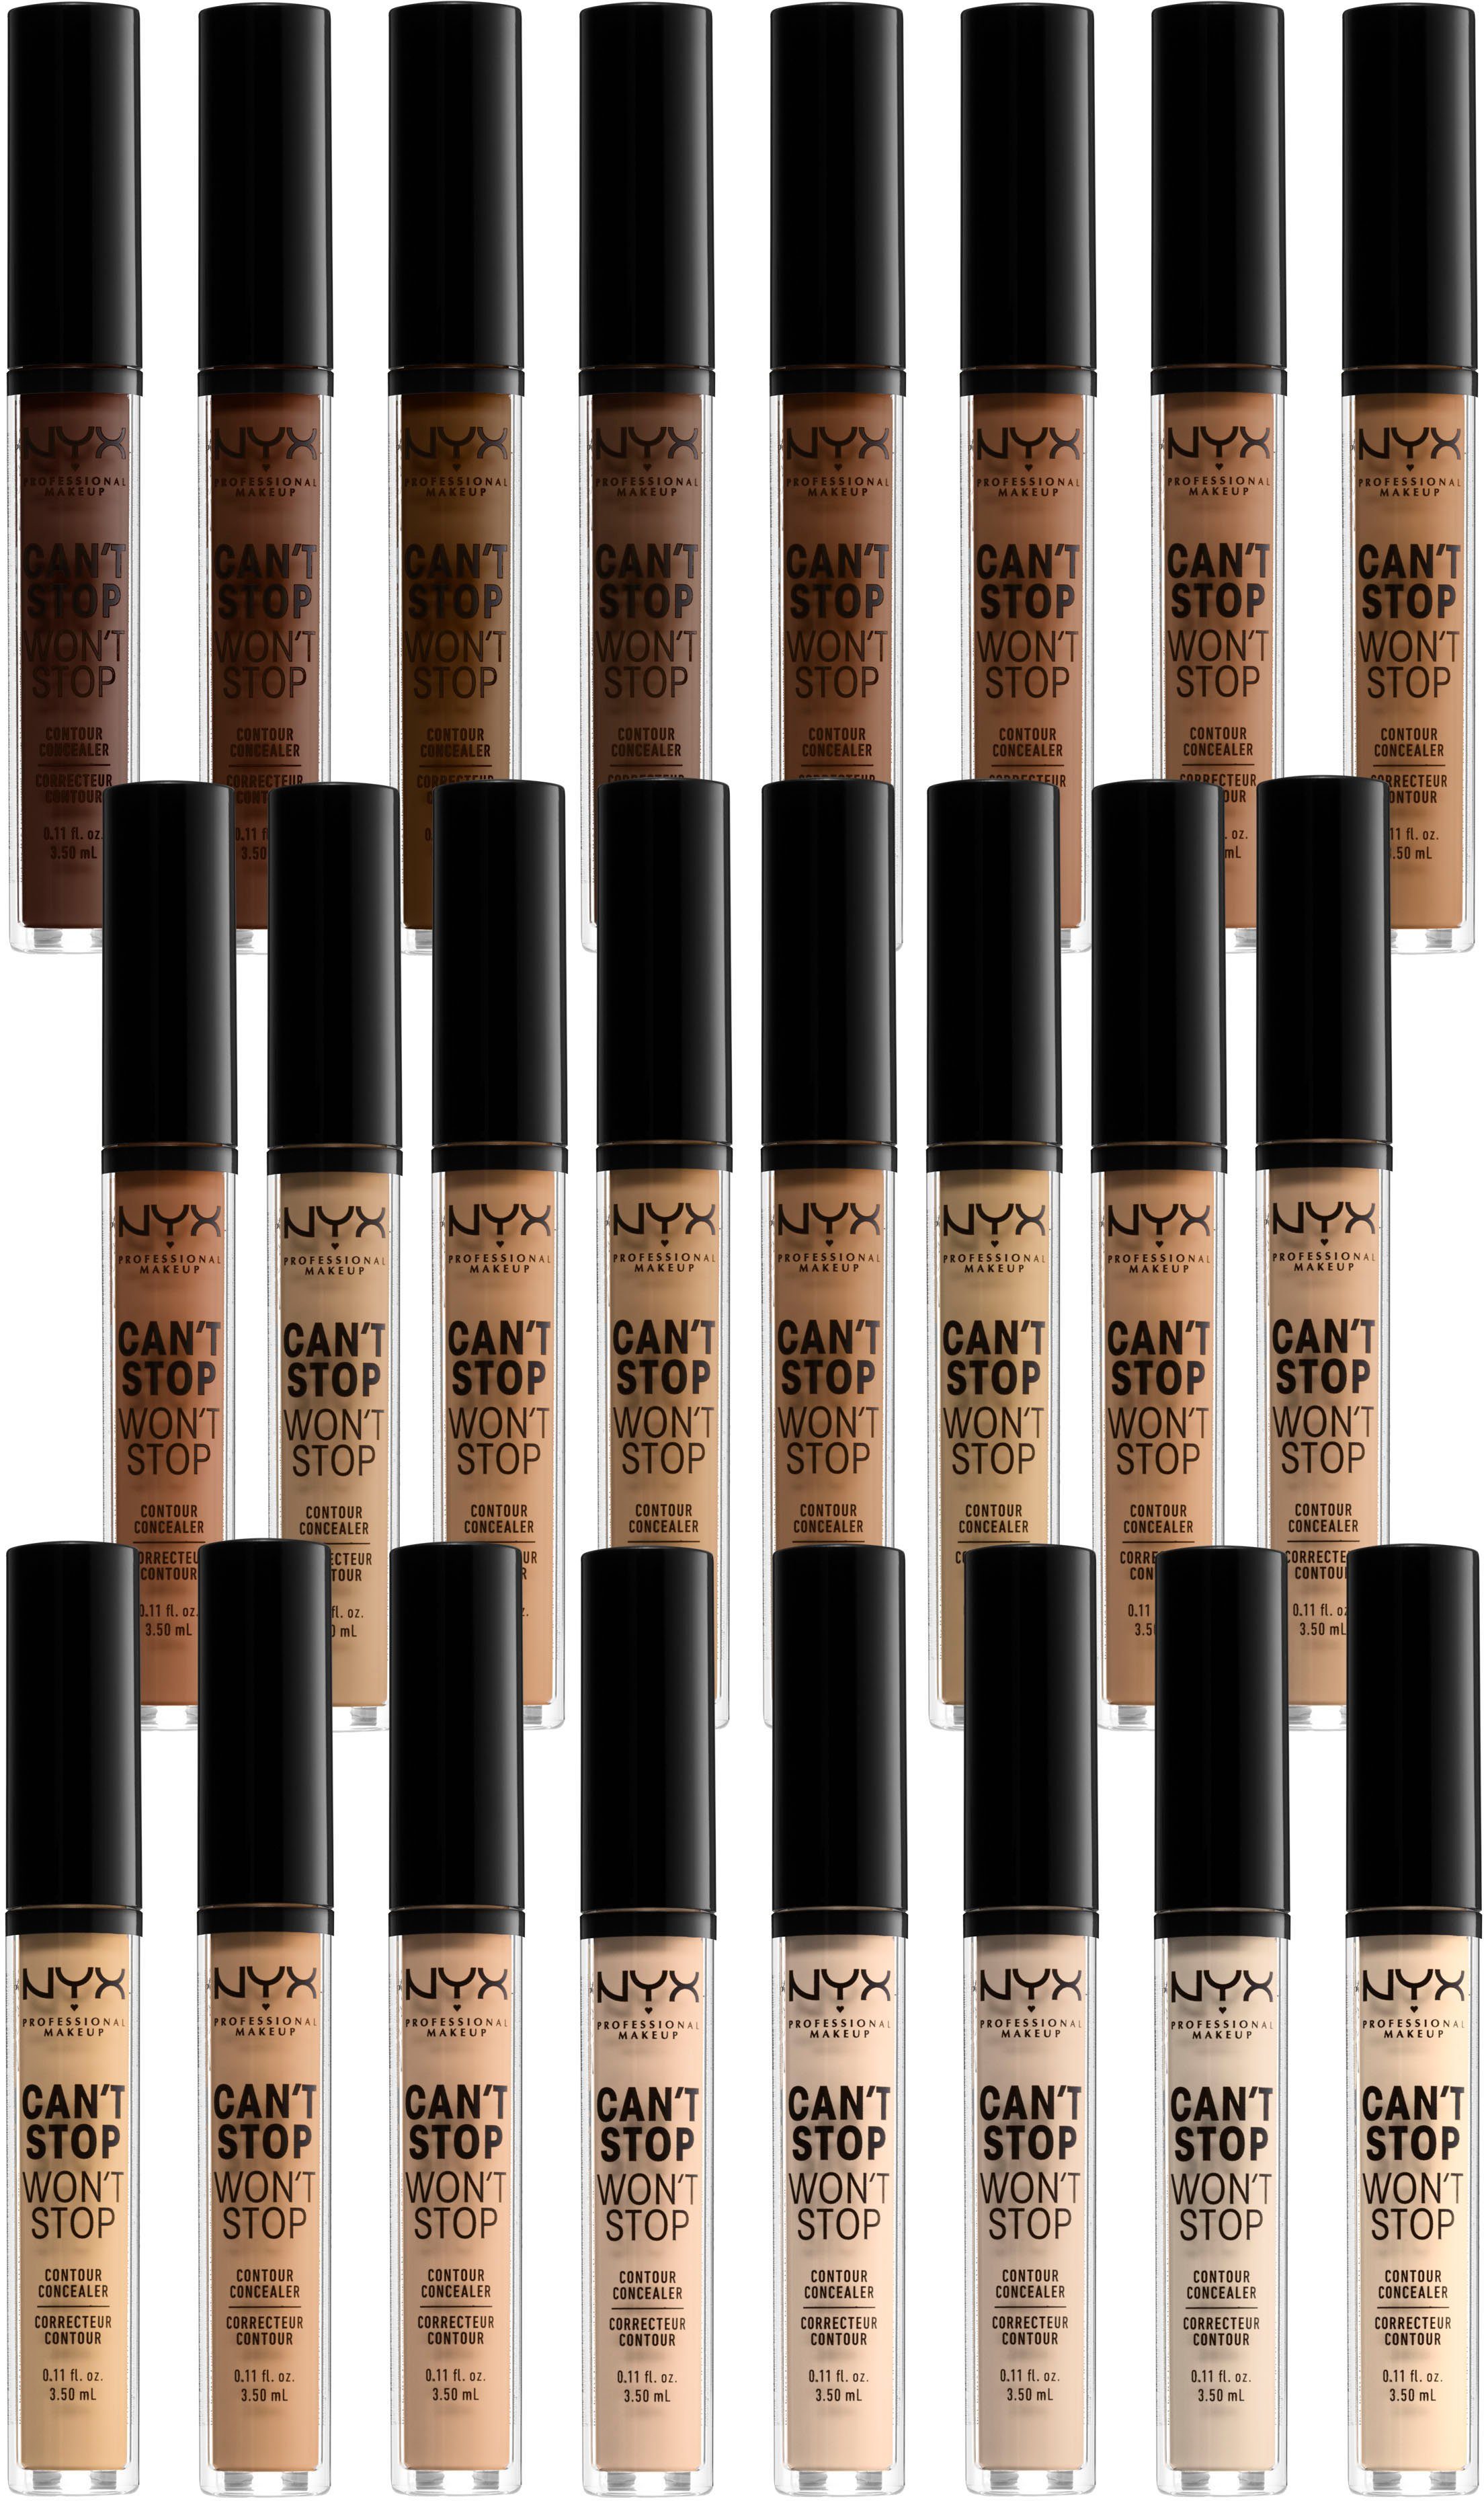 NYX CSWSC06 Stop Can´t Concealer Stop NYX Concealer Won´t Makeup Vanilla Professional